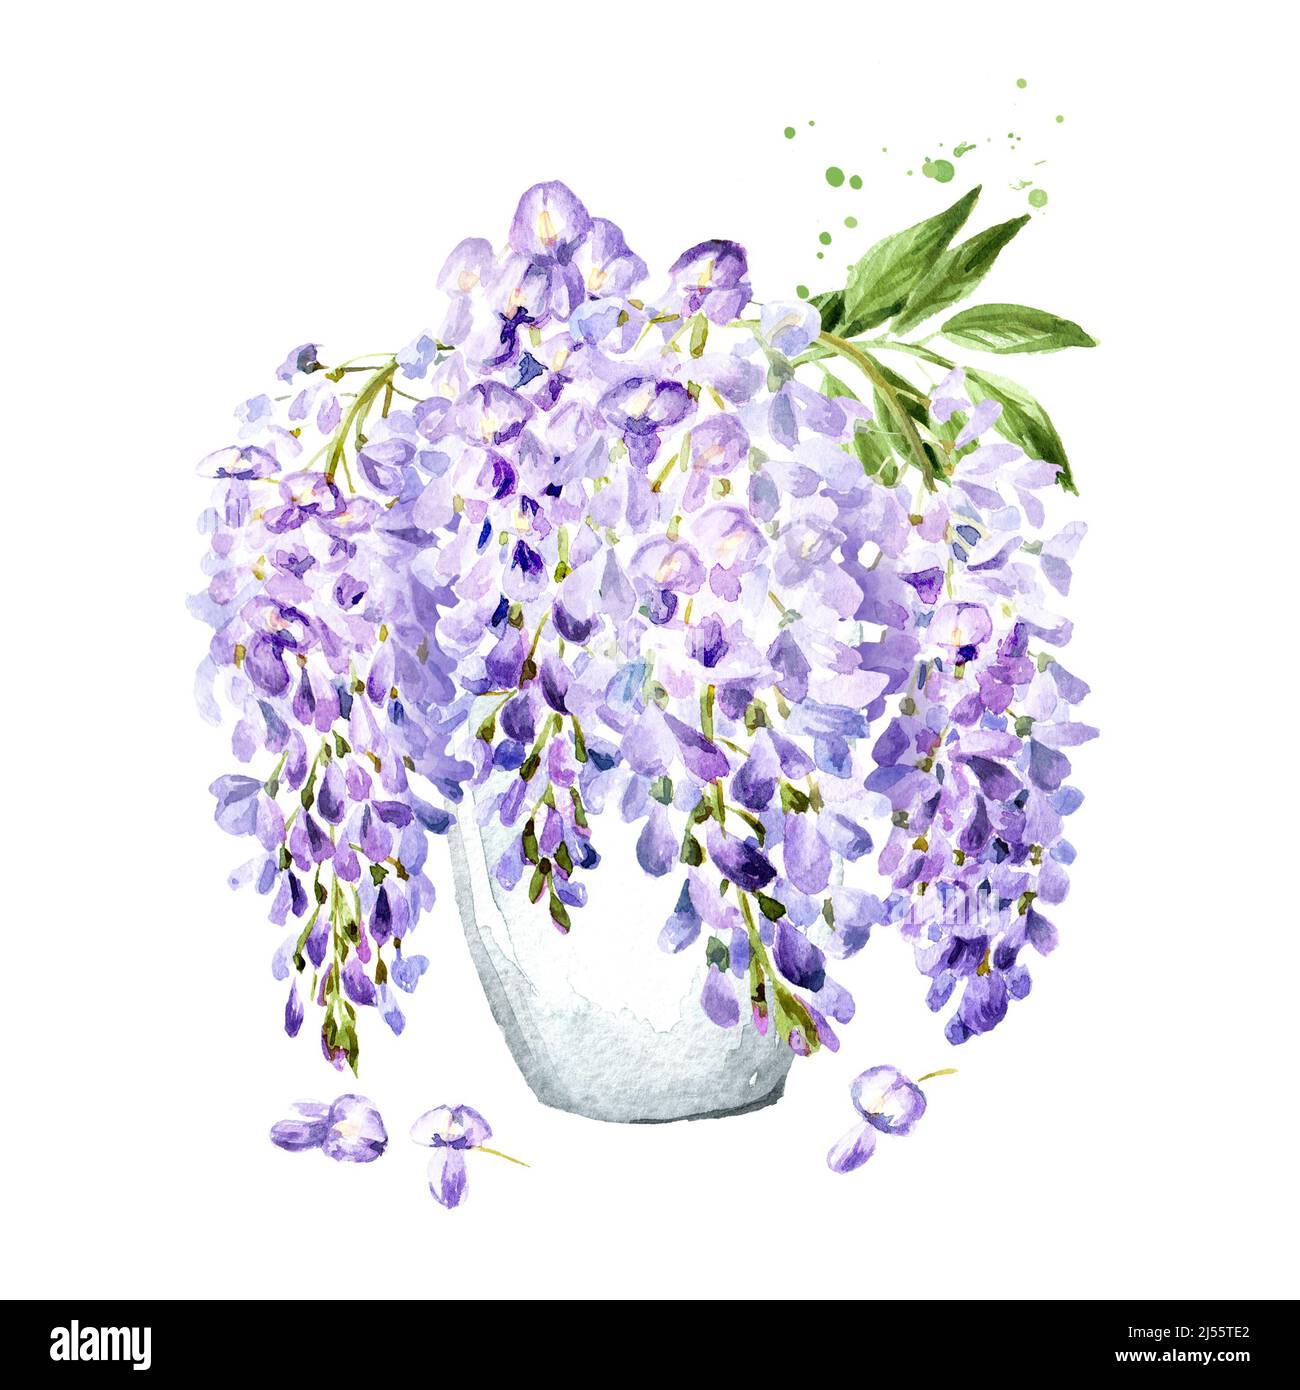 Fresh picked Purple pink blue wisteria flower  blossom bouquet in a vase. Hand drawn watercolor illustration, isolated on white background Stock Photo